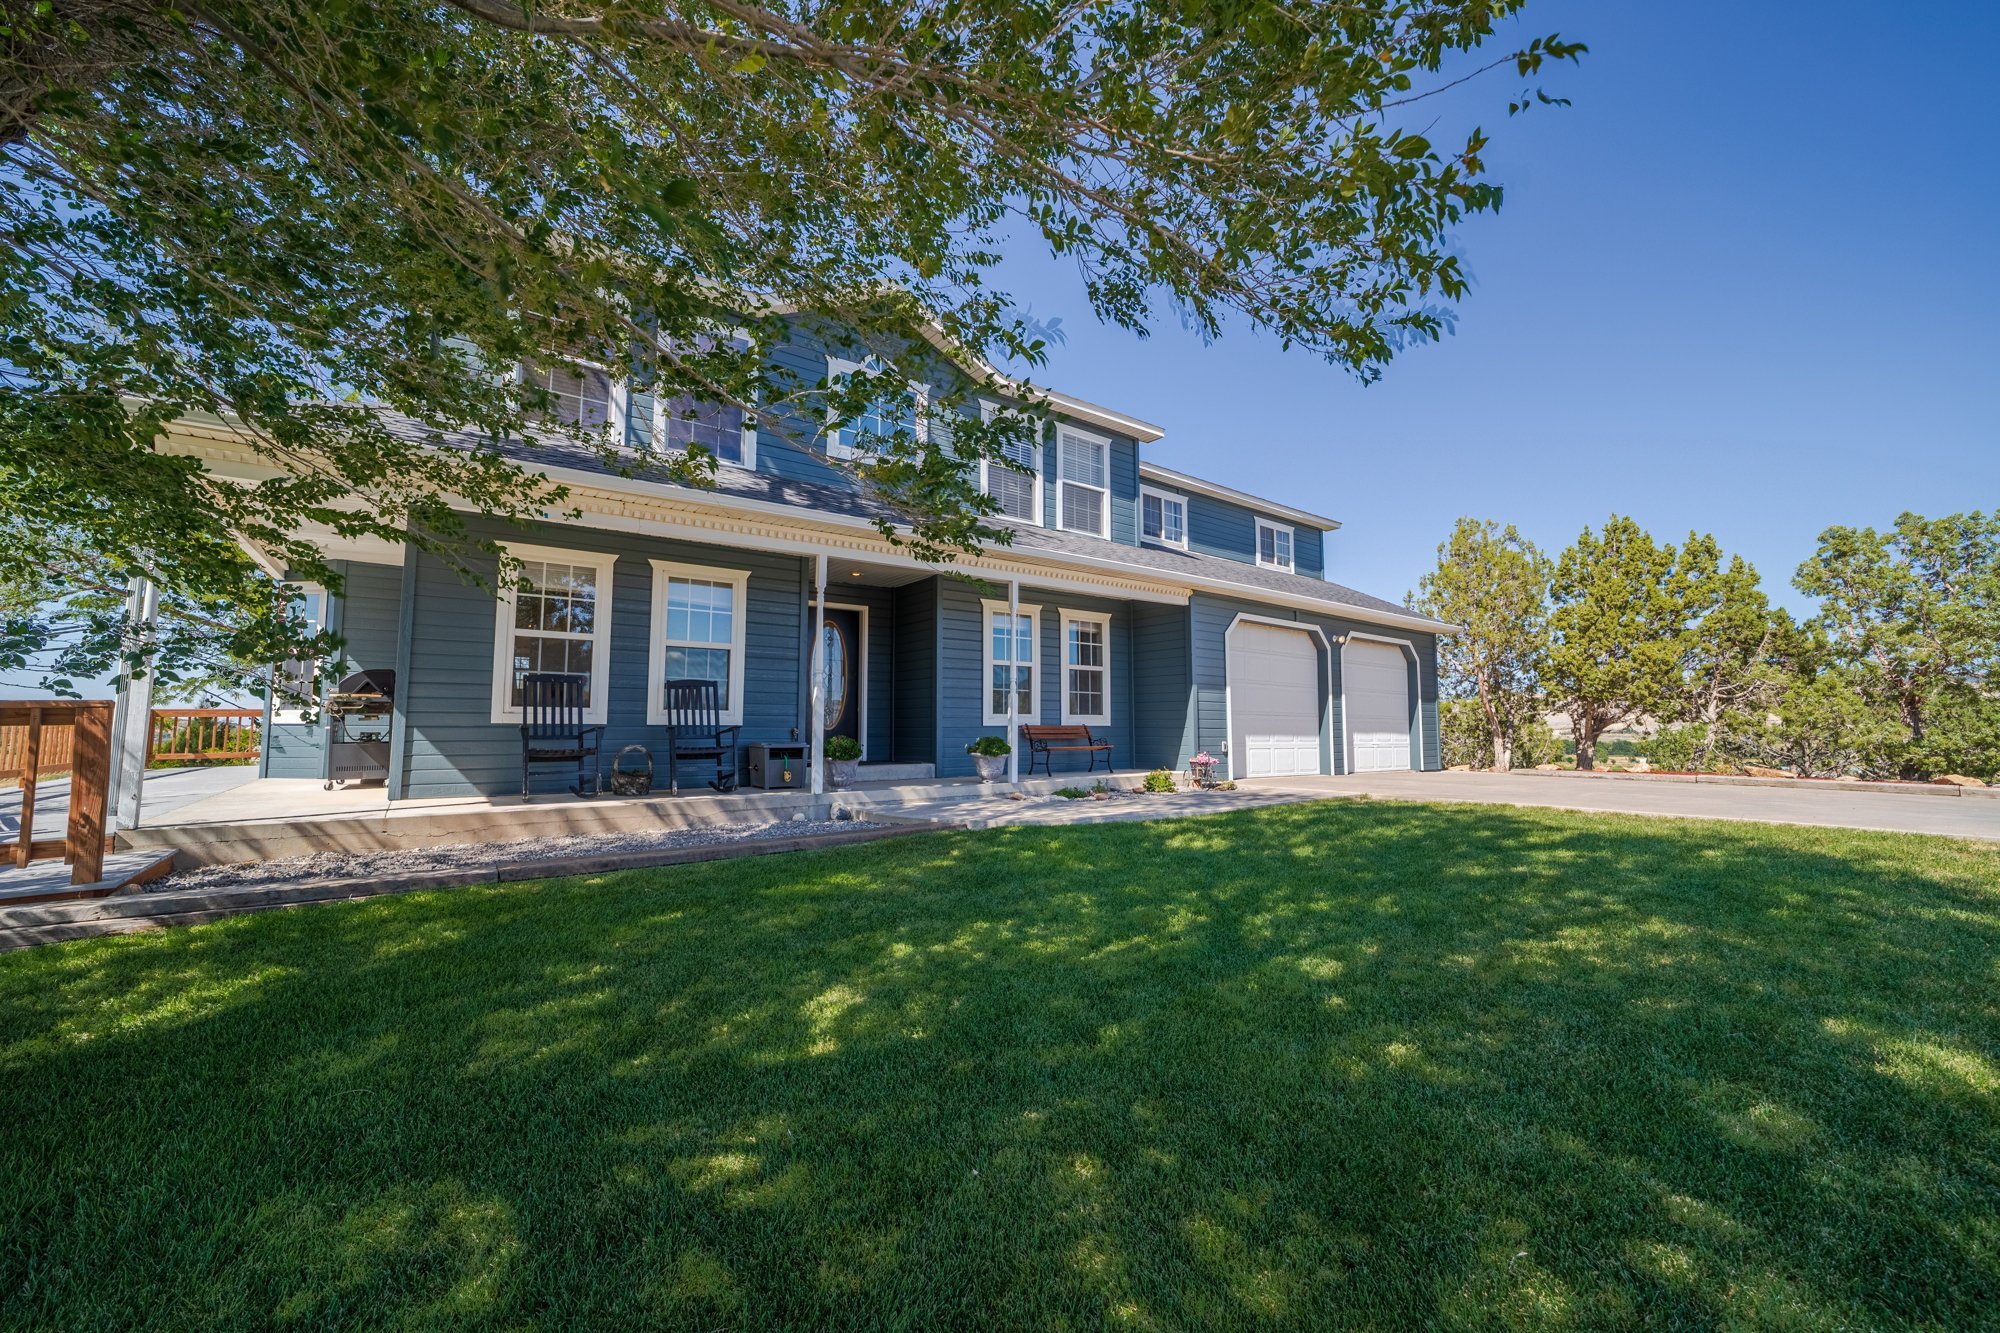 2 Story Farmhouse for Sale with Guest House - 21835 Government Springs Rd - Atha Team Realty Montrose Colorado